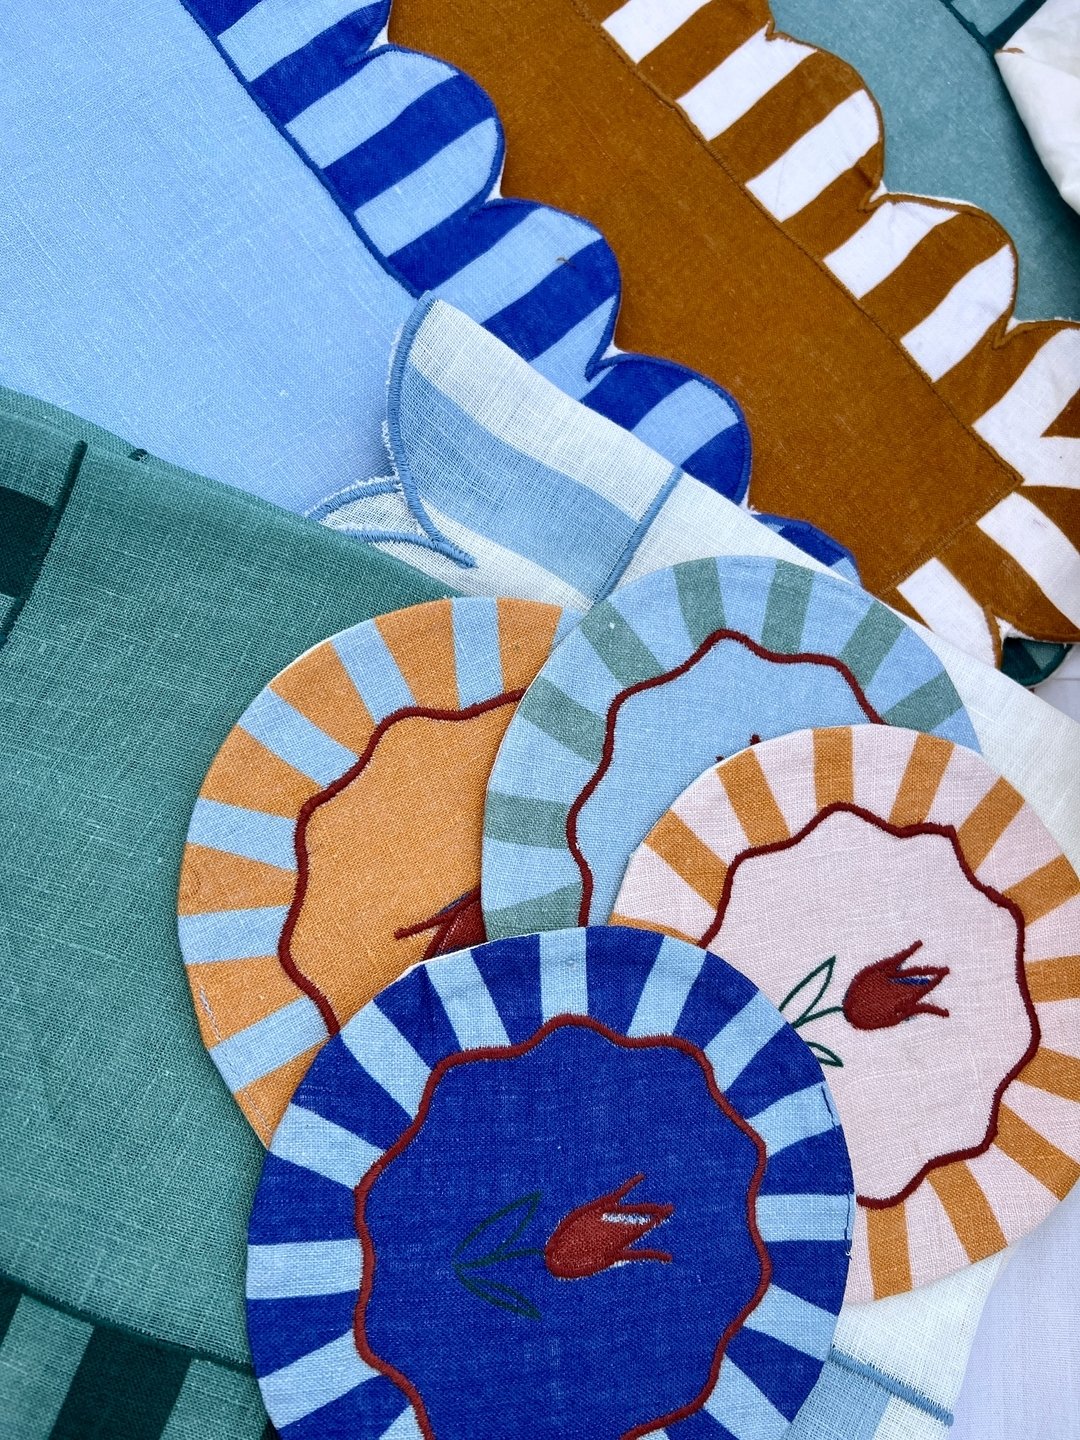 Placemats, napkins and coasters. Get ready for your summer entertaining. Scalloped edges, hand embroidery, pretty color palette -- these pieces will be the talk of the town. 

#twowebster #shopthecape #shoposterville #shopmelange #homedecor #homesoha